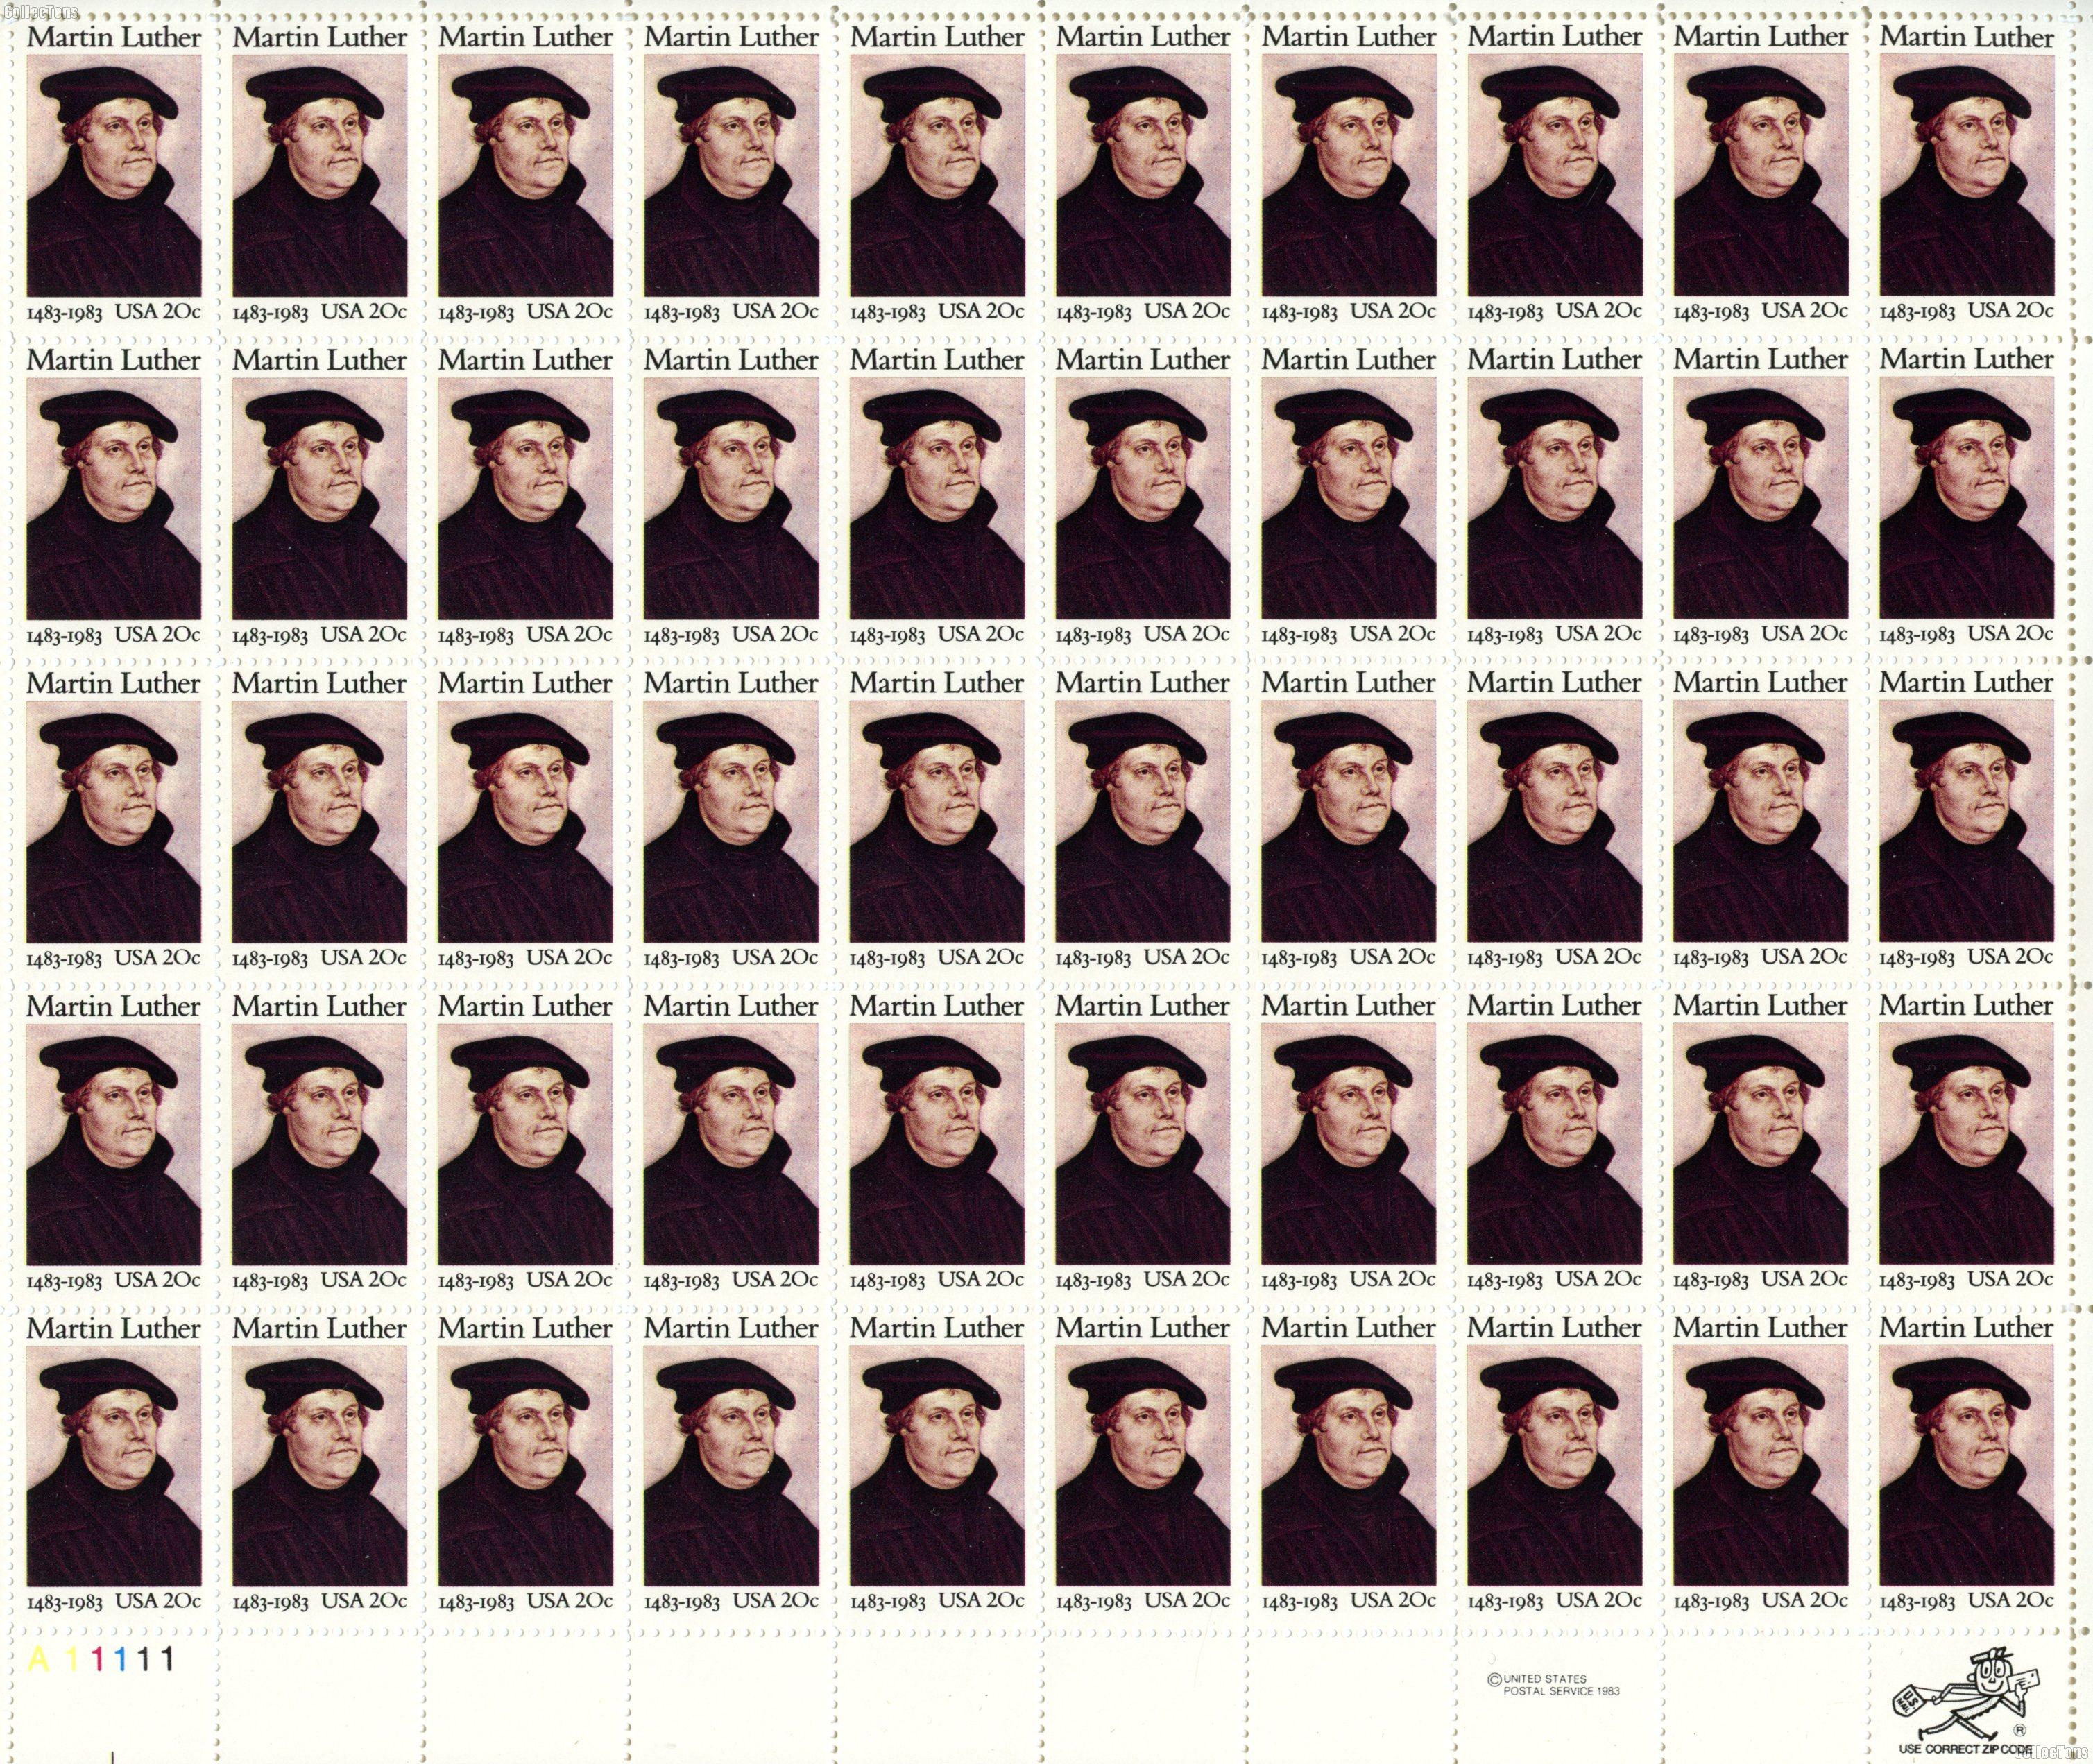 1983 Martin Luther 20 Cent US Postage Stamp MNH Sheet of 50 Scott #2065